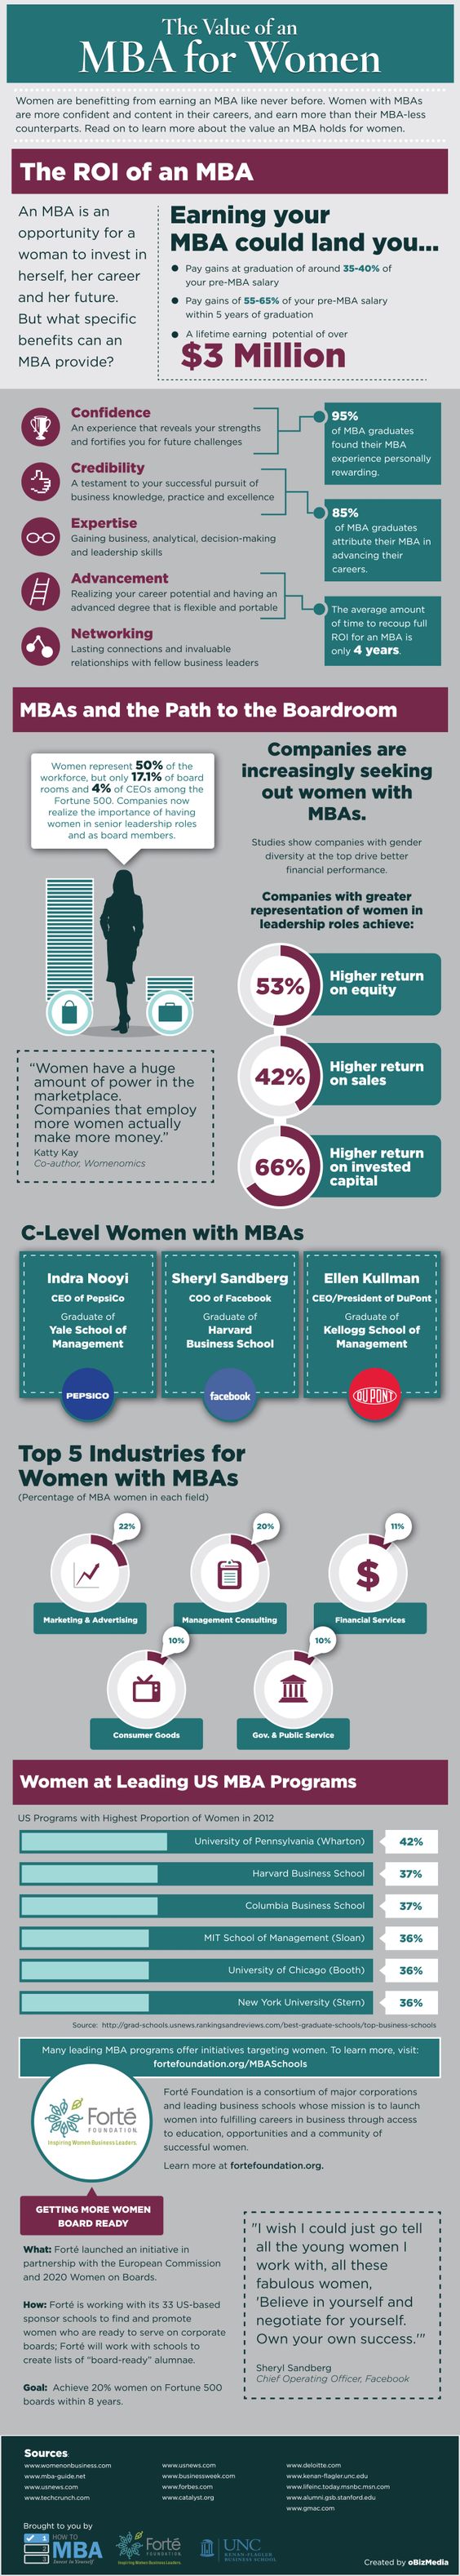 The return on investment (ROI) from an MBA statistics infographic